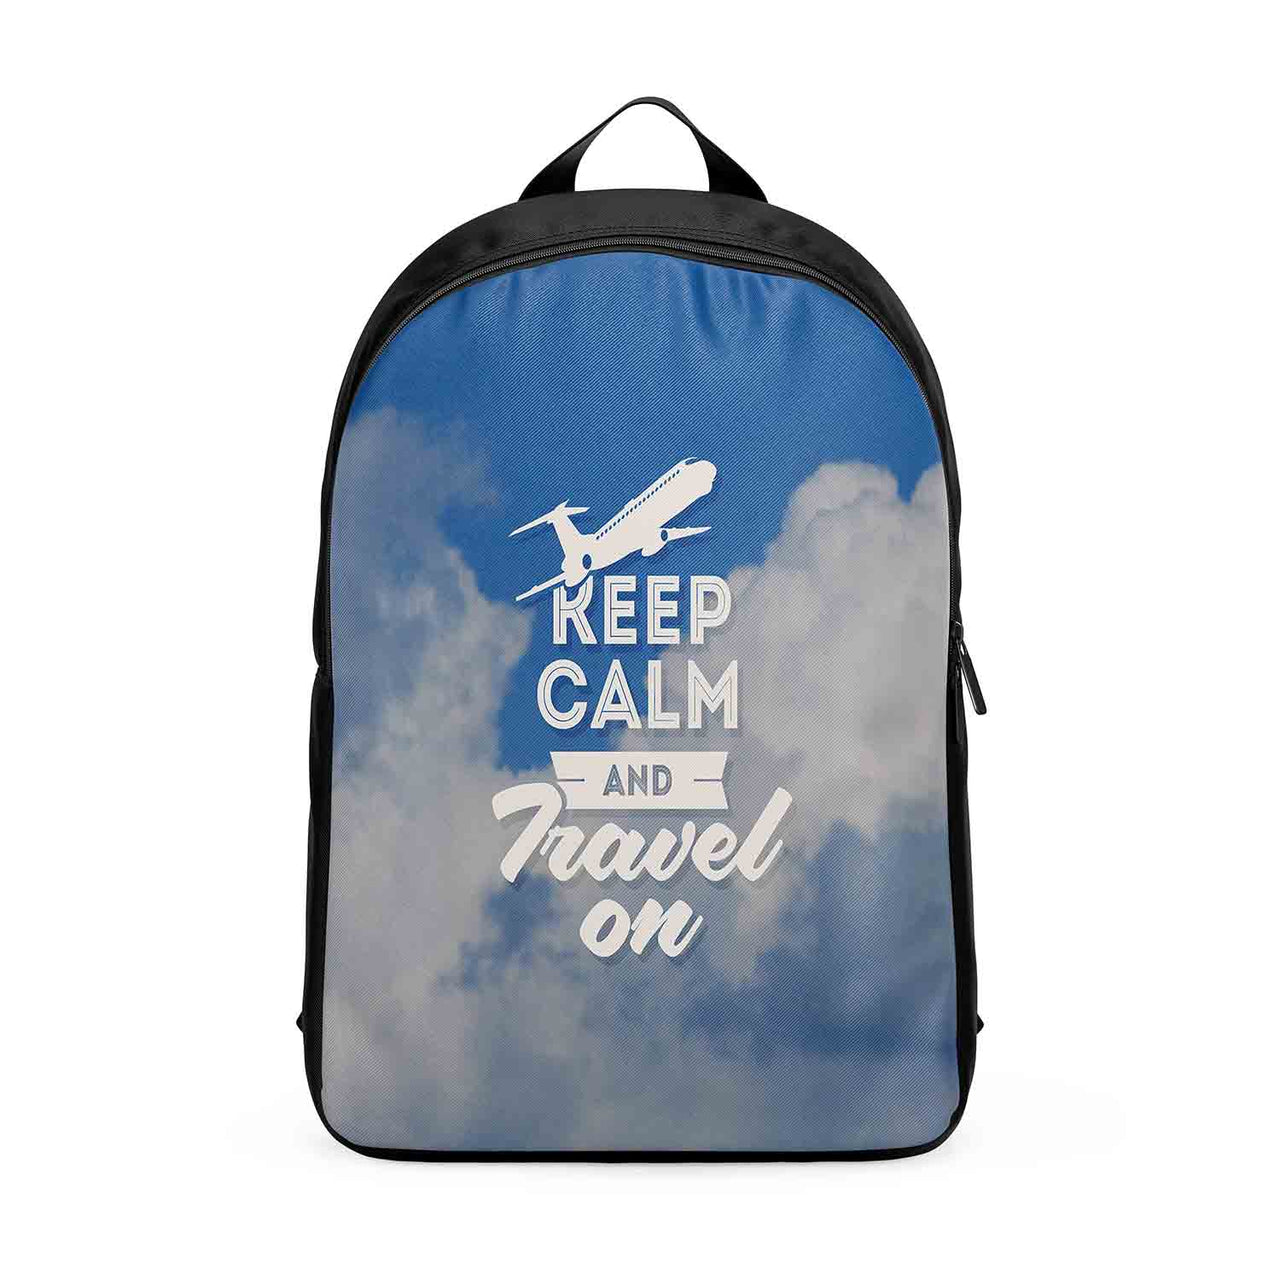 Keep Calm and Travel On Designed Backpacks